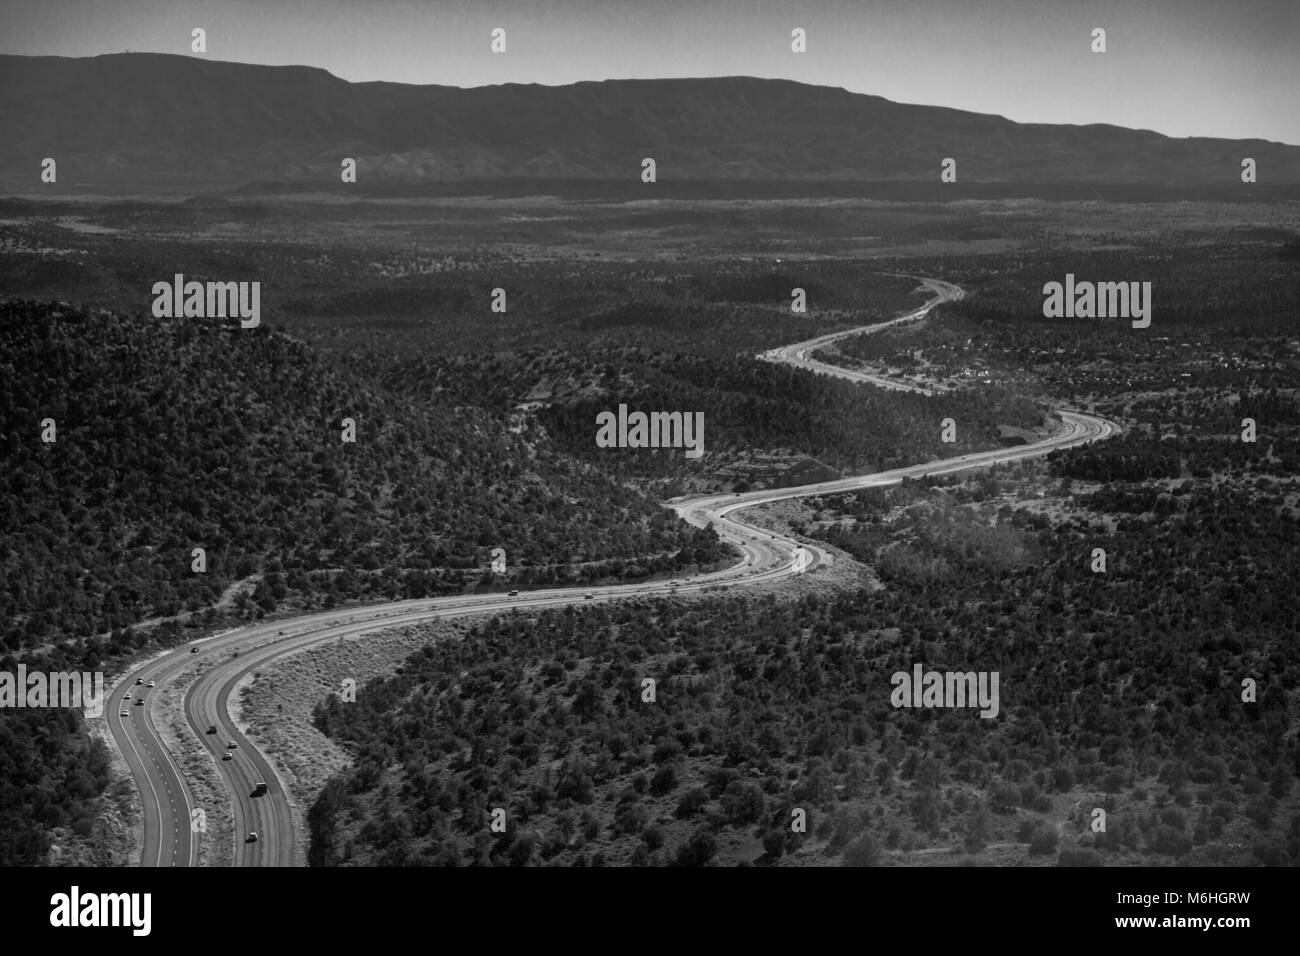 An expansive aerial landscape of an Arizona Highway winding through a grand forest, taken from a helicopter. Stock Photo